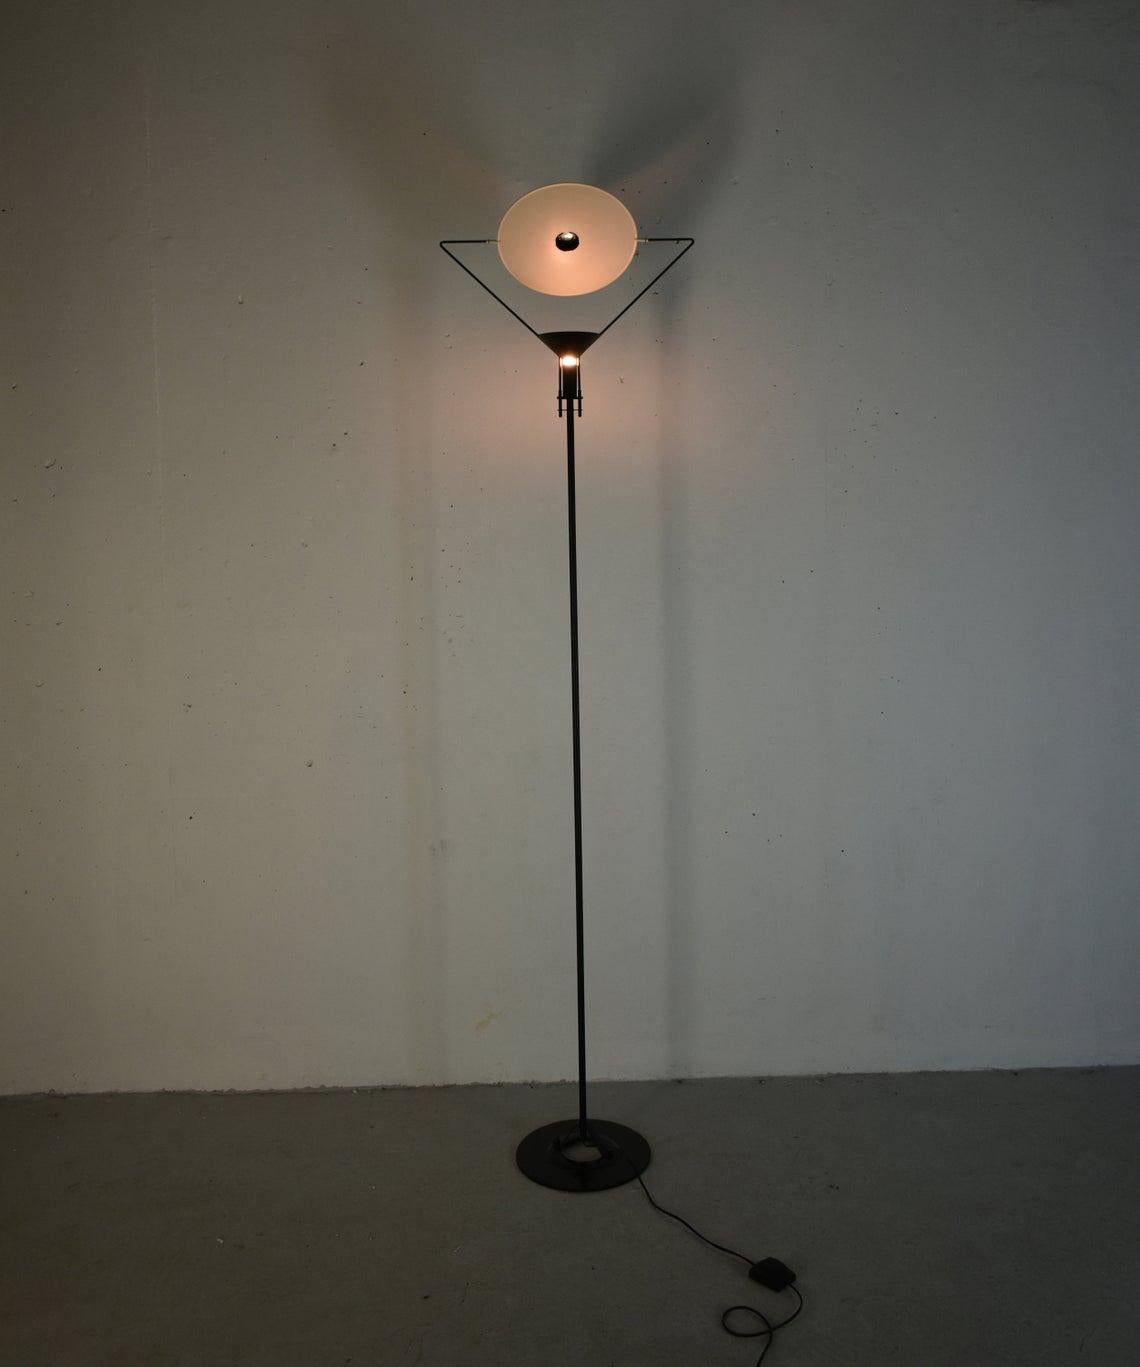 Lacquered Postmodern Italian 'Polifemo' Floor Lamp, Carlo Forcolini for Artemide, 1980s